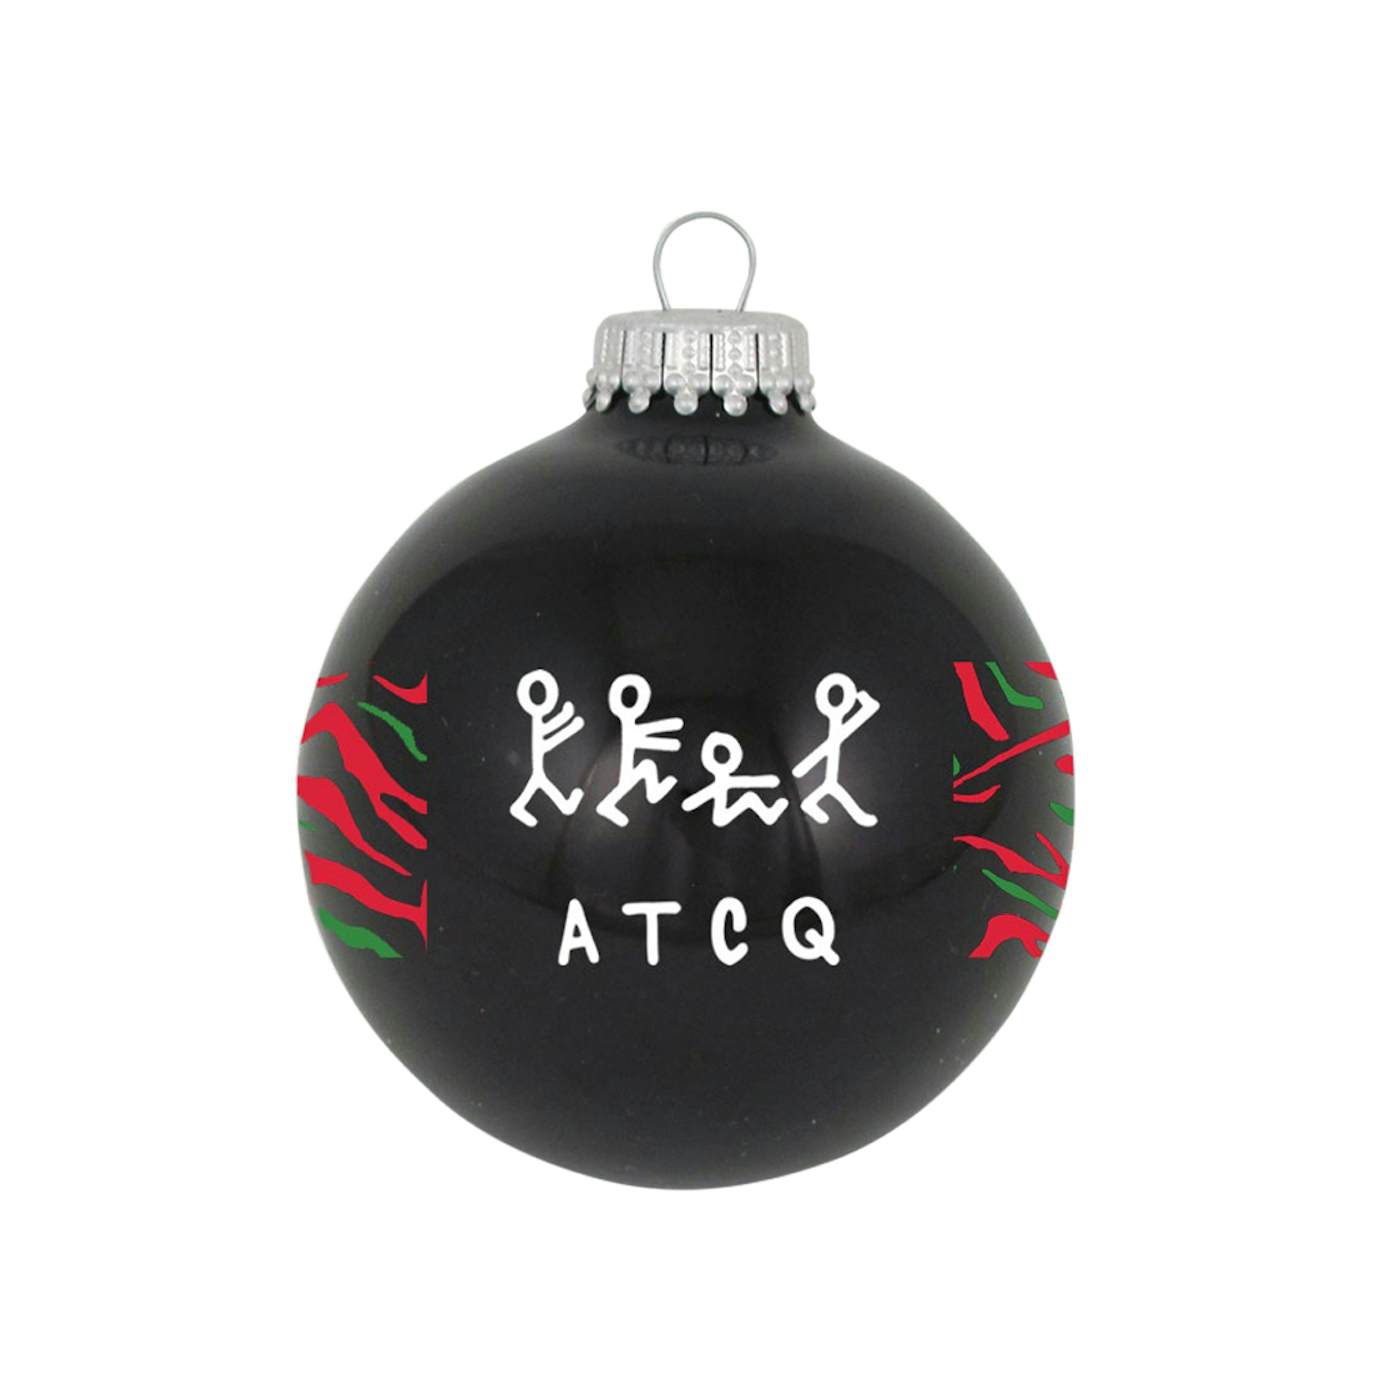 A Tribe Called Quest 3 1/4" Glass Ornament